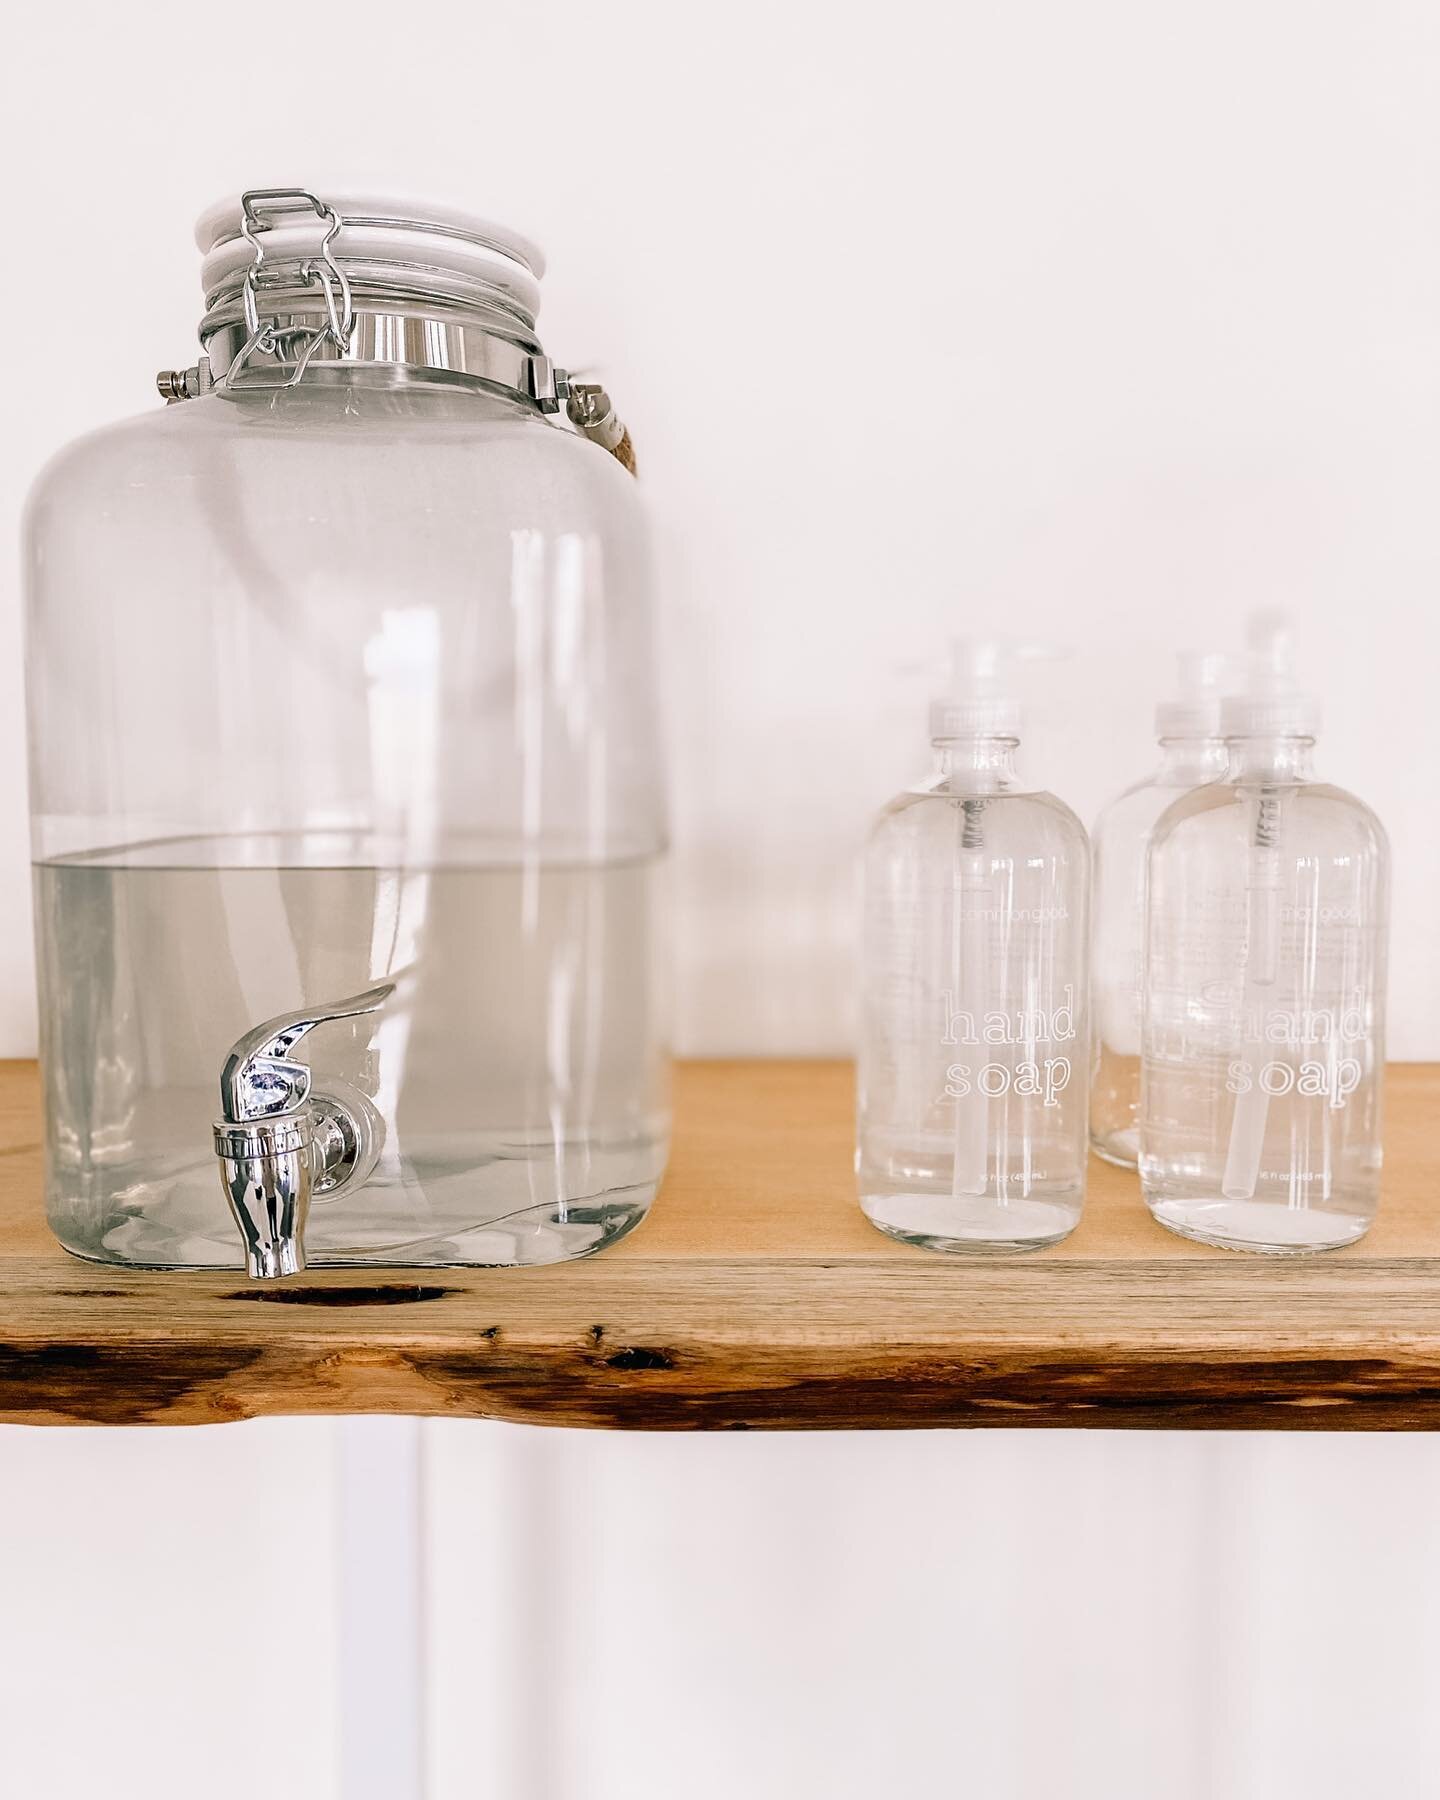 Looking for a way to reduce your waste? Try our refillable soap station :: we have all purpose cleaner, hand soap, laundry soap and dish soap in bulk. 

Bring in an old glass jar and use to fill up or purchase one of our glass bottles. ✨

We are alwa